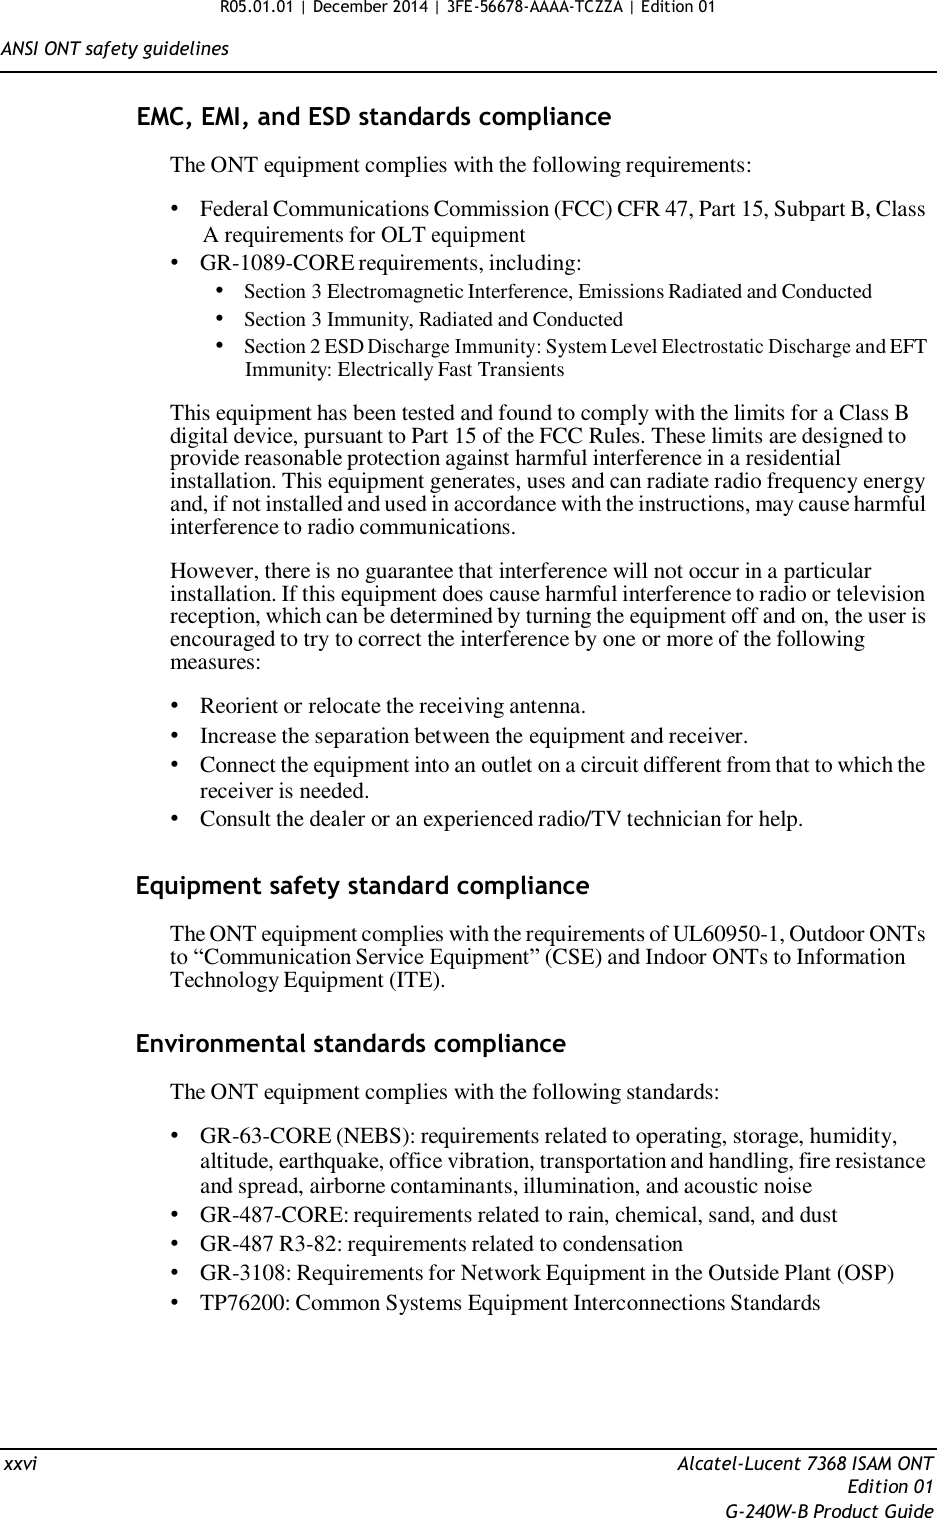 R05.01.01 | December 2014 | 3FE-56678-AAAA-TCZZA | Edition 01  ANSI ONT safety guidelines   EMC, EMI, and ESD standards compliance  The ONT equipment complies with the following requirements:  • Federal Communications Commission (FCC) CFR 47, Part 15, Subpart B, Class A requirements for OLT equipment • GR-1089-CORE requirements, including: • Section 3 Electromagnetic Interference, Emissions Radiated and Conducted • Section 3 Immunity, Radiated and Conducted • Section 2 ESD Discharge Immunity: System Level Electrostatic Discharge and EFT Immunity: Electrically Fast Transients  This equipment has been tested and found to comply with the limits for a Class B digital device, pursuant to Part 15 of the FCC Rules. These limits are designed to provide reasonable protection against harmful interference in a residential installation. This equipment generates, uses and can radiate radio frequency energy and, if not installed and used in accordance with the instructions, may cause harmful interference to radio communications.  However, there is no guarantee that interference will not occur in a particular installation. If this equipment does cause harmful interference to radio or television reception, which can be determined by turning the equipment off and on, the user is encouraged to try to correct the interference by one or more of the following measures:  • Reorient or relocate the receiving antenna. • Increase the separation between the equipment and receiver. • Connect the equipment into an outlet on a circuit different from that to which the receiver is needed. • Consult the dealer or an experienced radio/TV technician for help.   Equipment safety standard compliance  The ONT equipment complies with the requirements of UL60950-1, Outdoor ONTs to “Communication Service Equipment” (CSE) and Indoor ONTs to Information Technology Equipment (ITE).   Environmental standards compliance  The ONT equipment complies with the following standards:  • GR-63-CORE (NEBS): requirements related to operating, storage, humidity, altitude, earthquake, office vibration, transportation and handling, fire resistance and spread, airborne contaminants, illumination, and acoustic noise • GR-487-CORE: requirements related to rain, chemical, sand, and dust • GR-487 R3-82: requirements related to condensation • GR-3108: Requirements for Network Equipment in the Outside Plant (OSP) • TP76200: Common Systems Equipment Interconnections Standards        xxvi  Alcatel-Lucent 7368 ISAM ONT Edition 01 G-240W-B Product Guide 